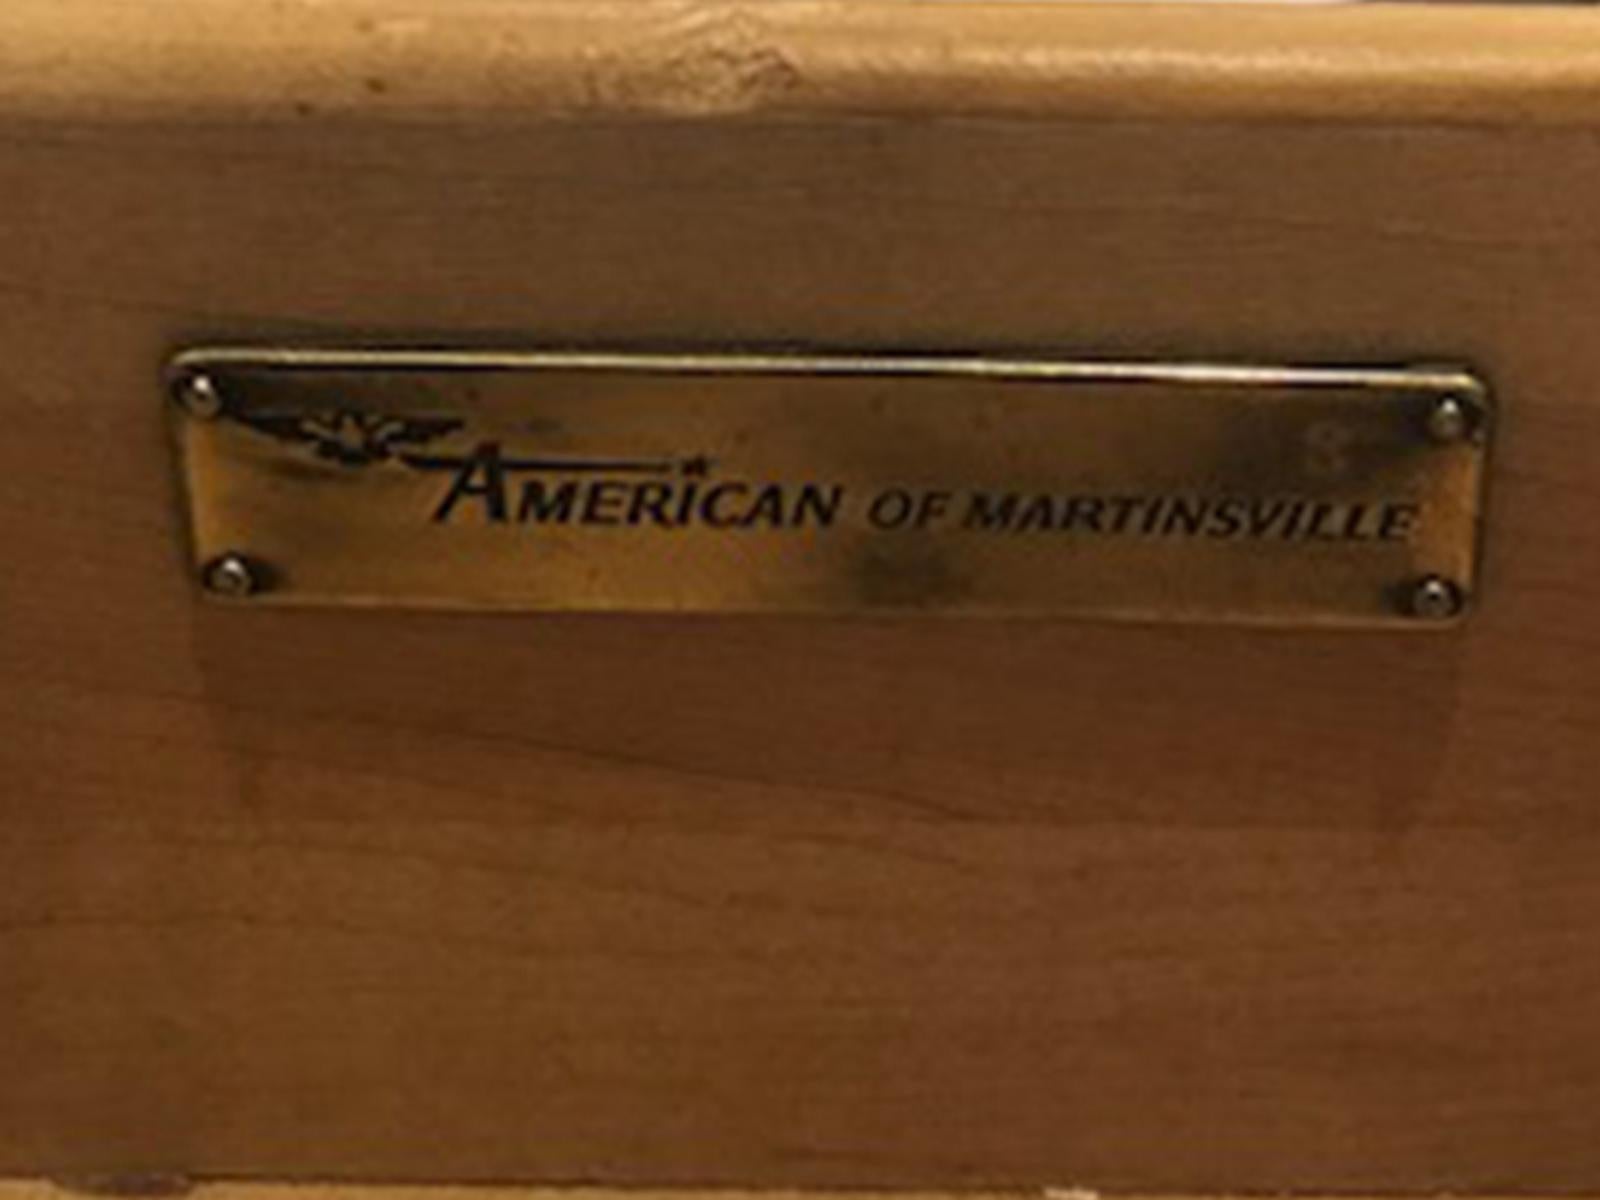 Narrow mid-20th century American of Martinsville multi-drawer burled chest, circa 1970s
Labeled with plate.